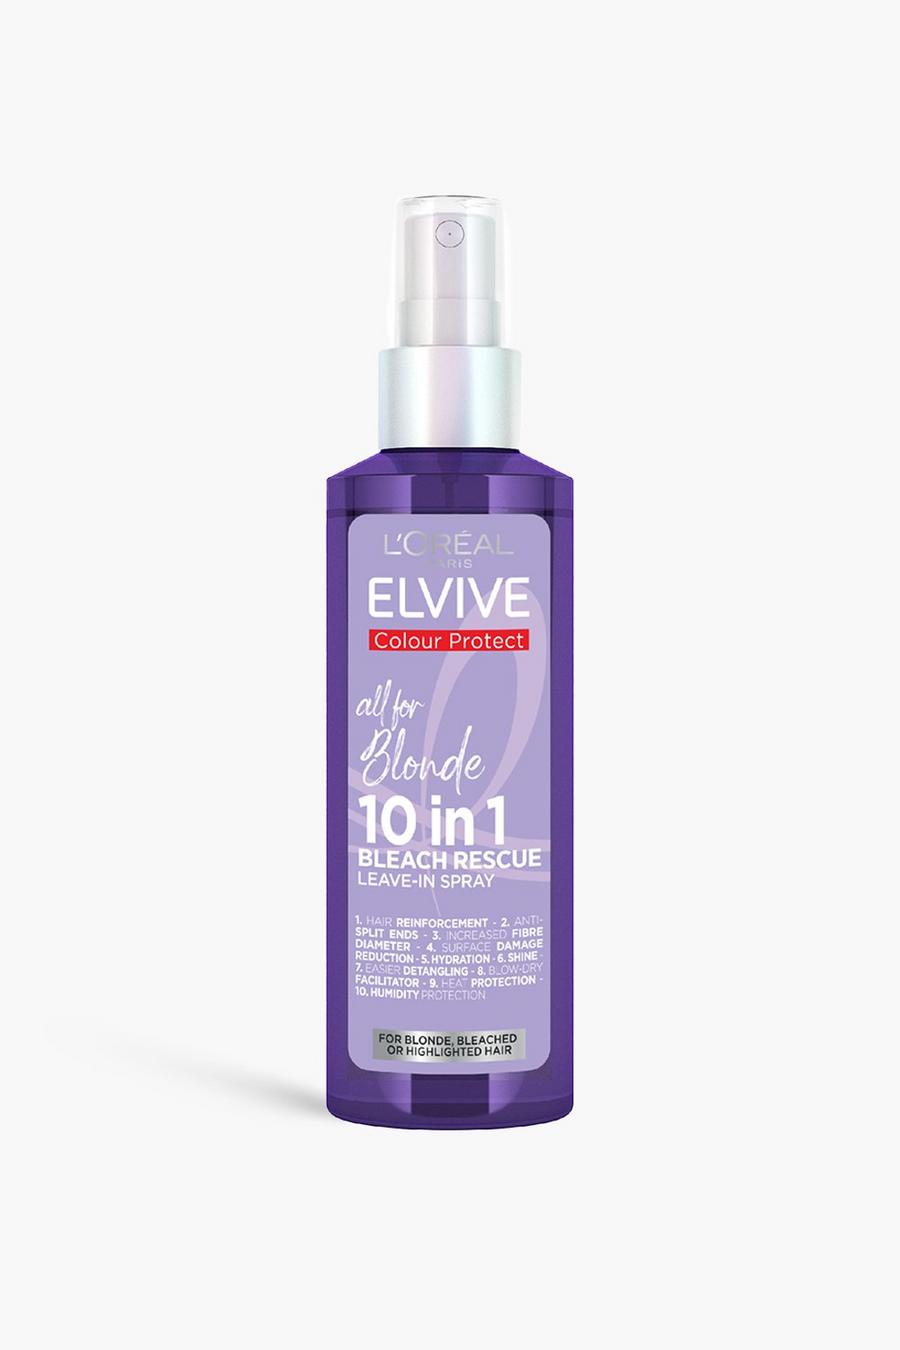 Clear L'Oreal Elvive All for Blonde 10-in-1 Bleach Rescue Leave in Spray, for all types of blonde image number 1